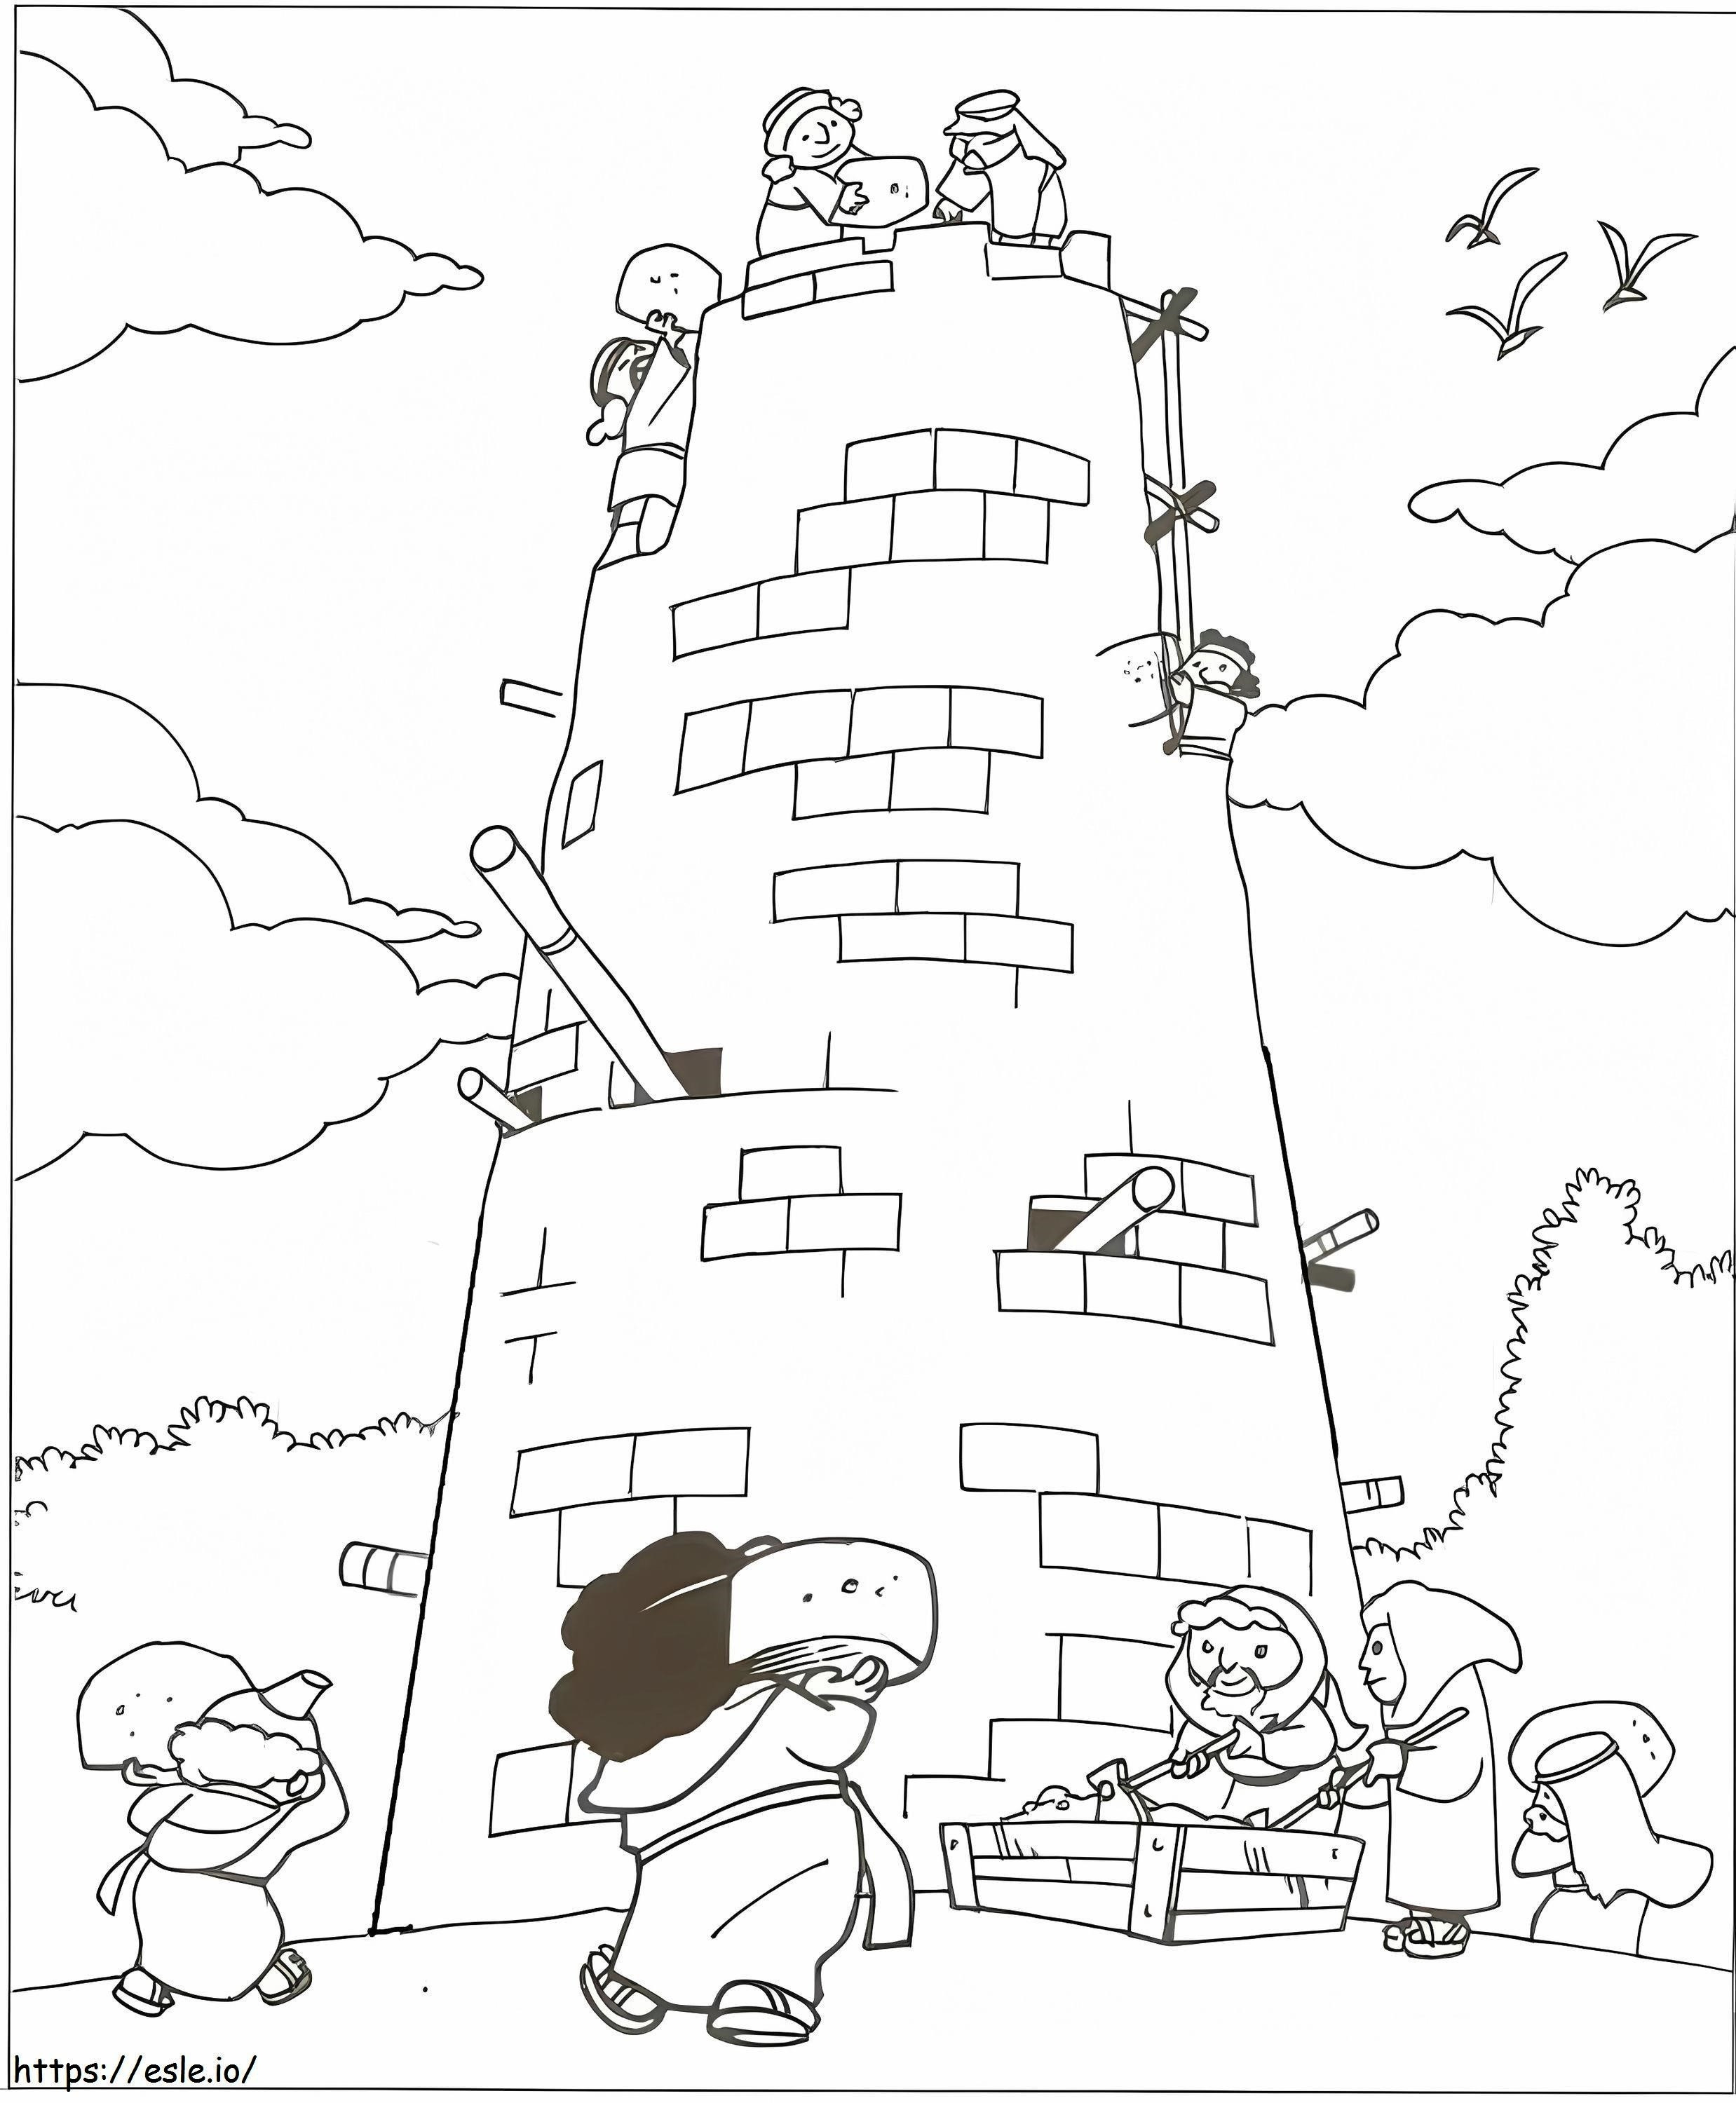 Building Tower Of Babel coloring page